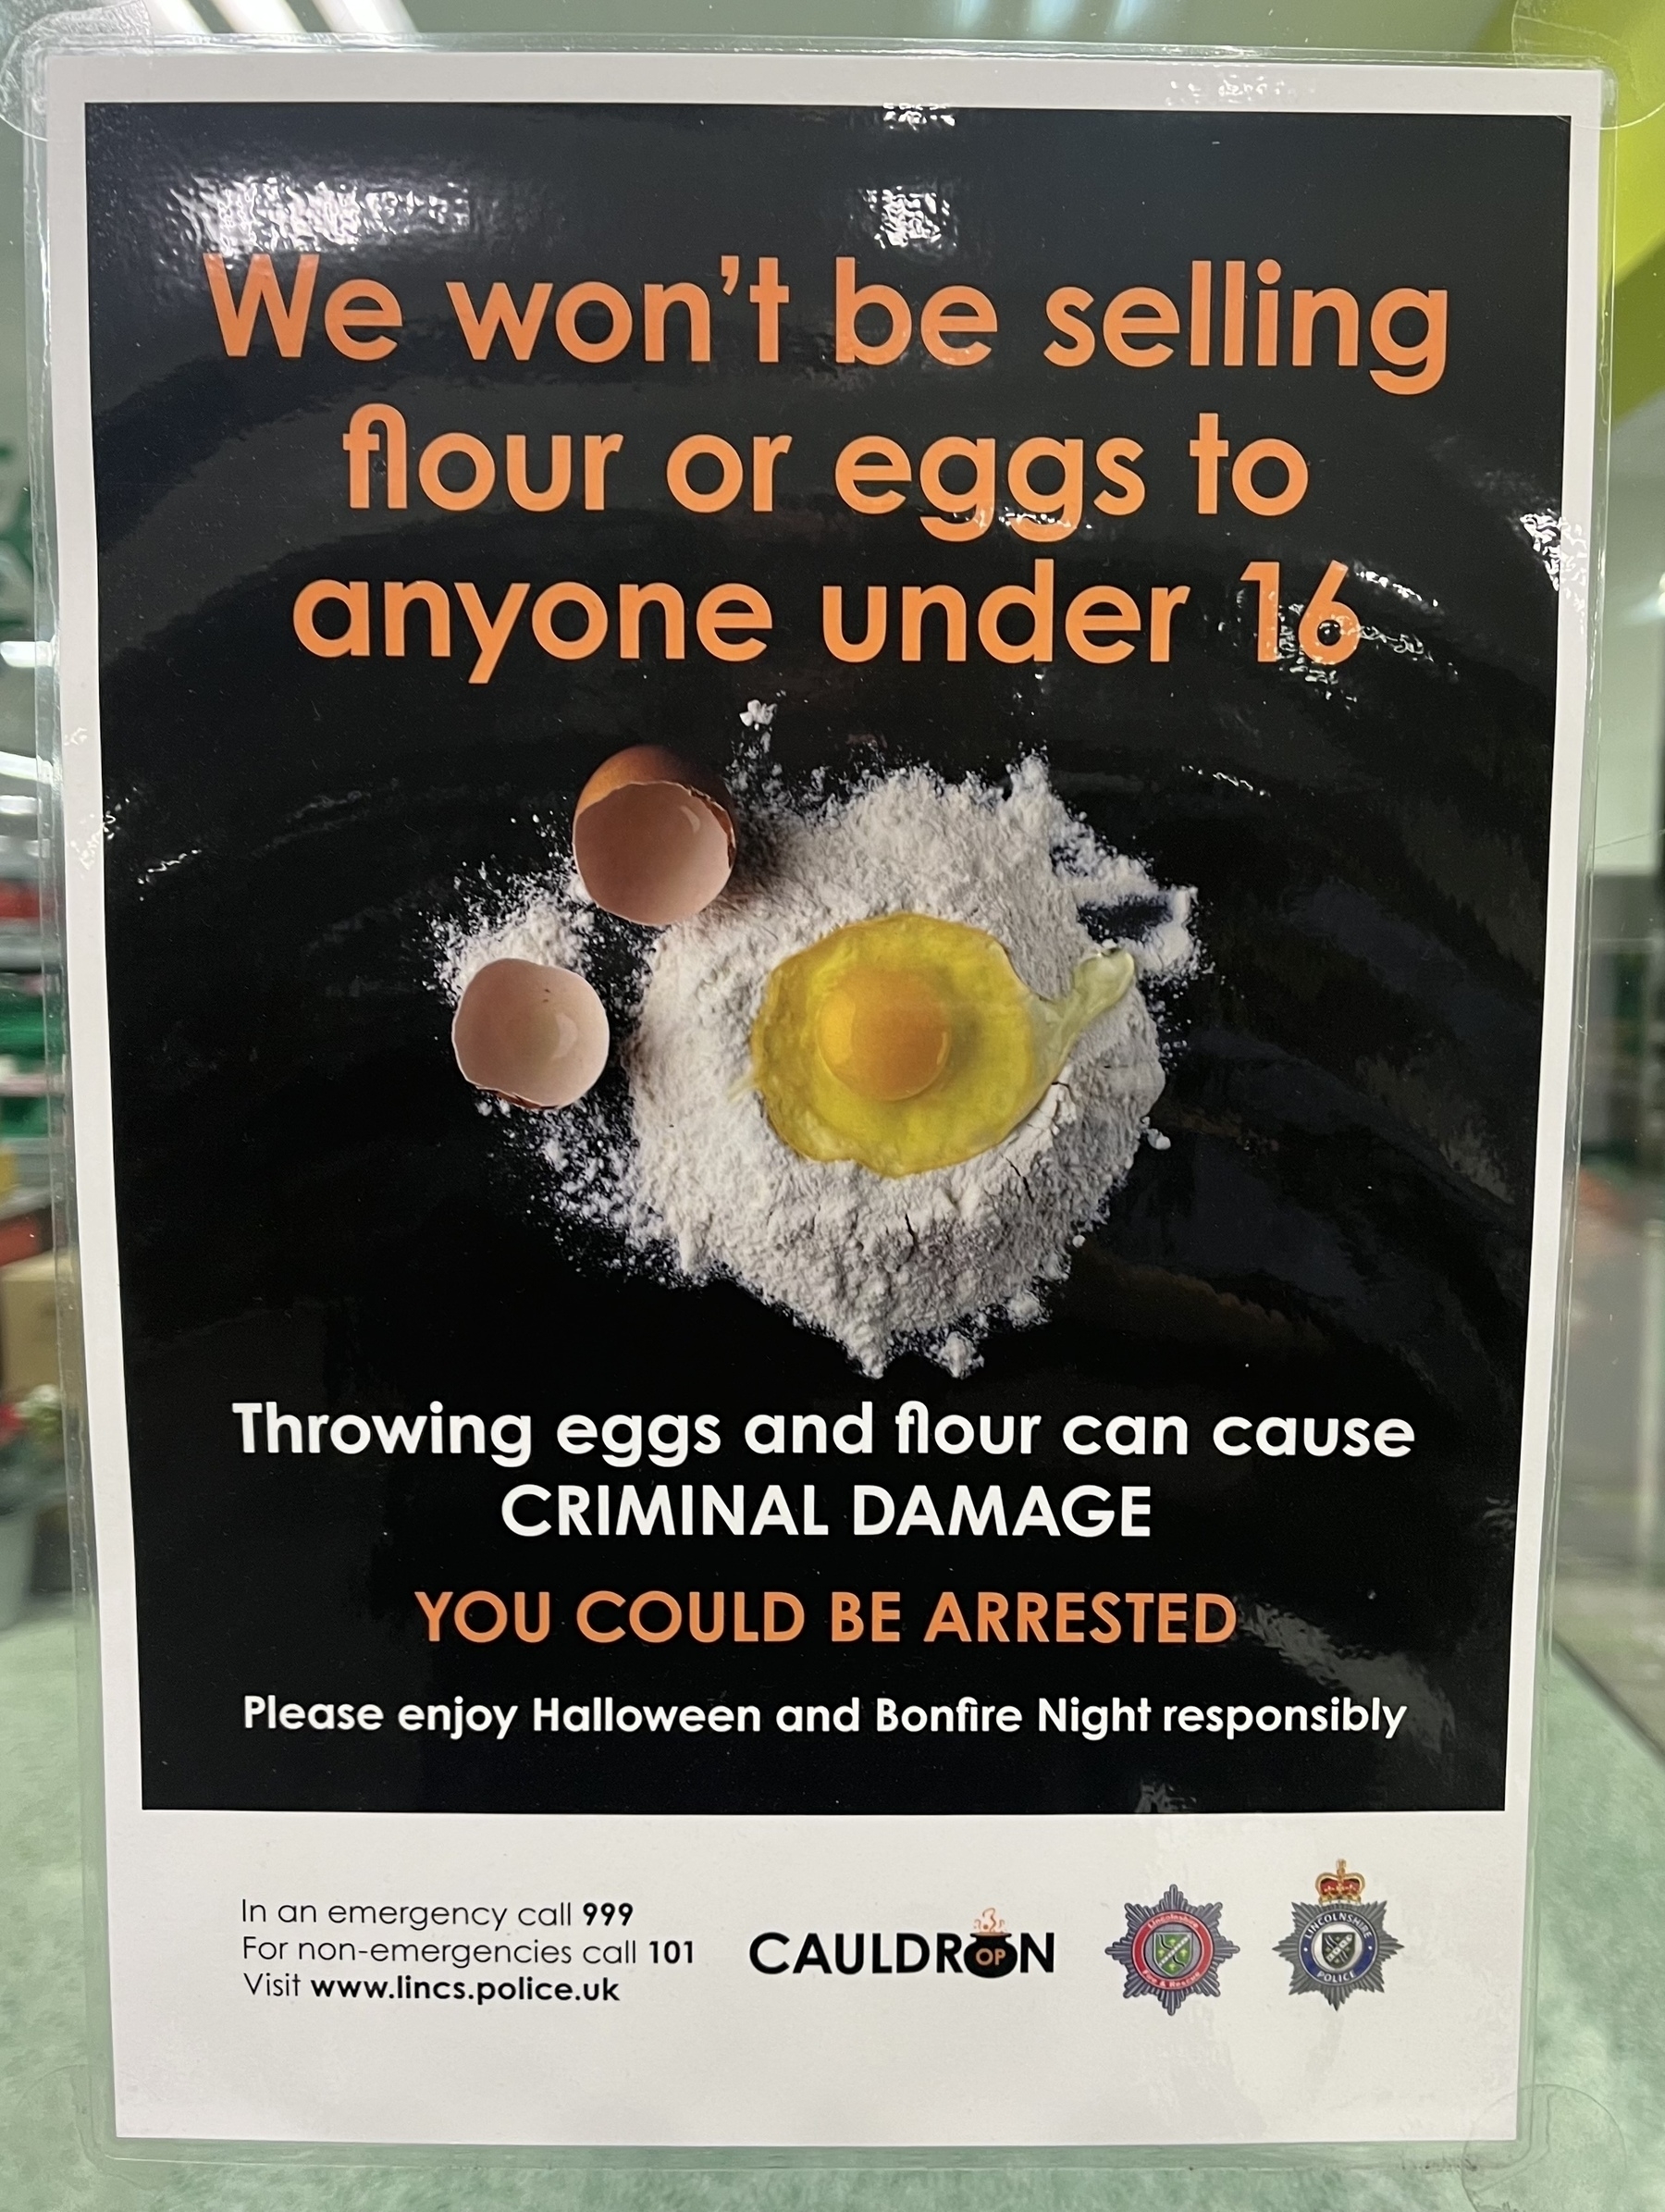 Poster refusing sale of eggs or flour to people under 16 years old